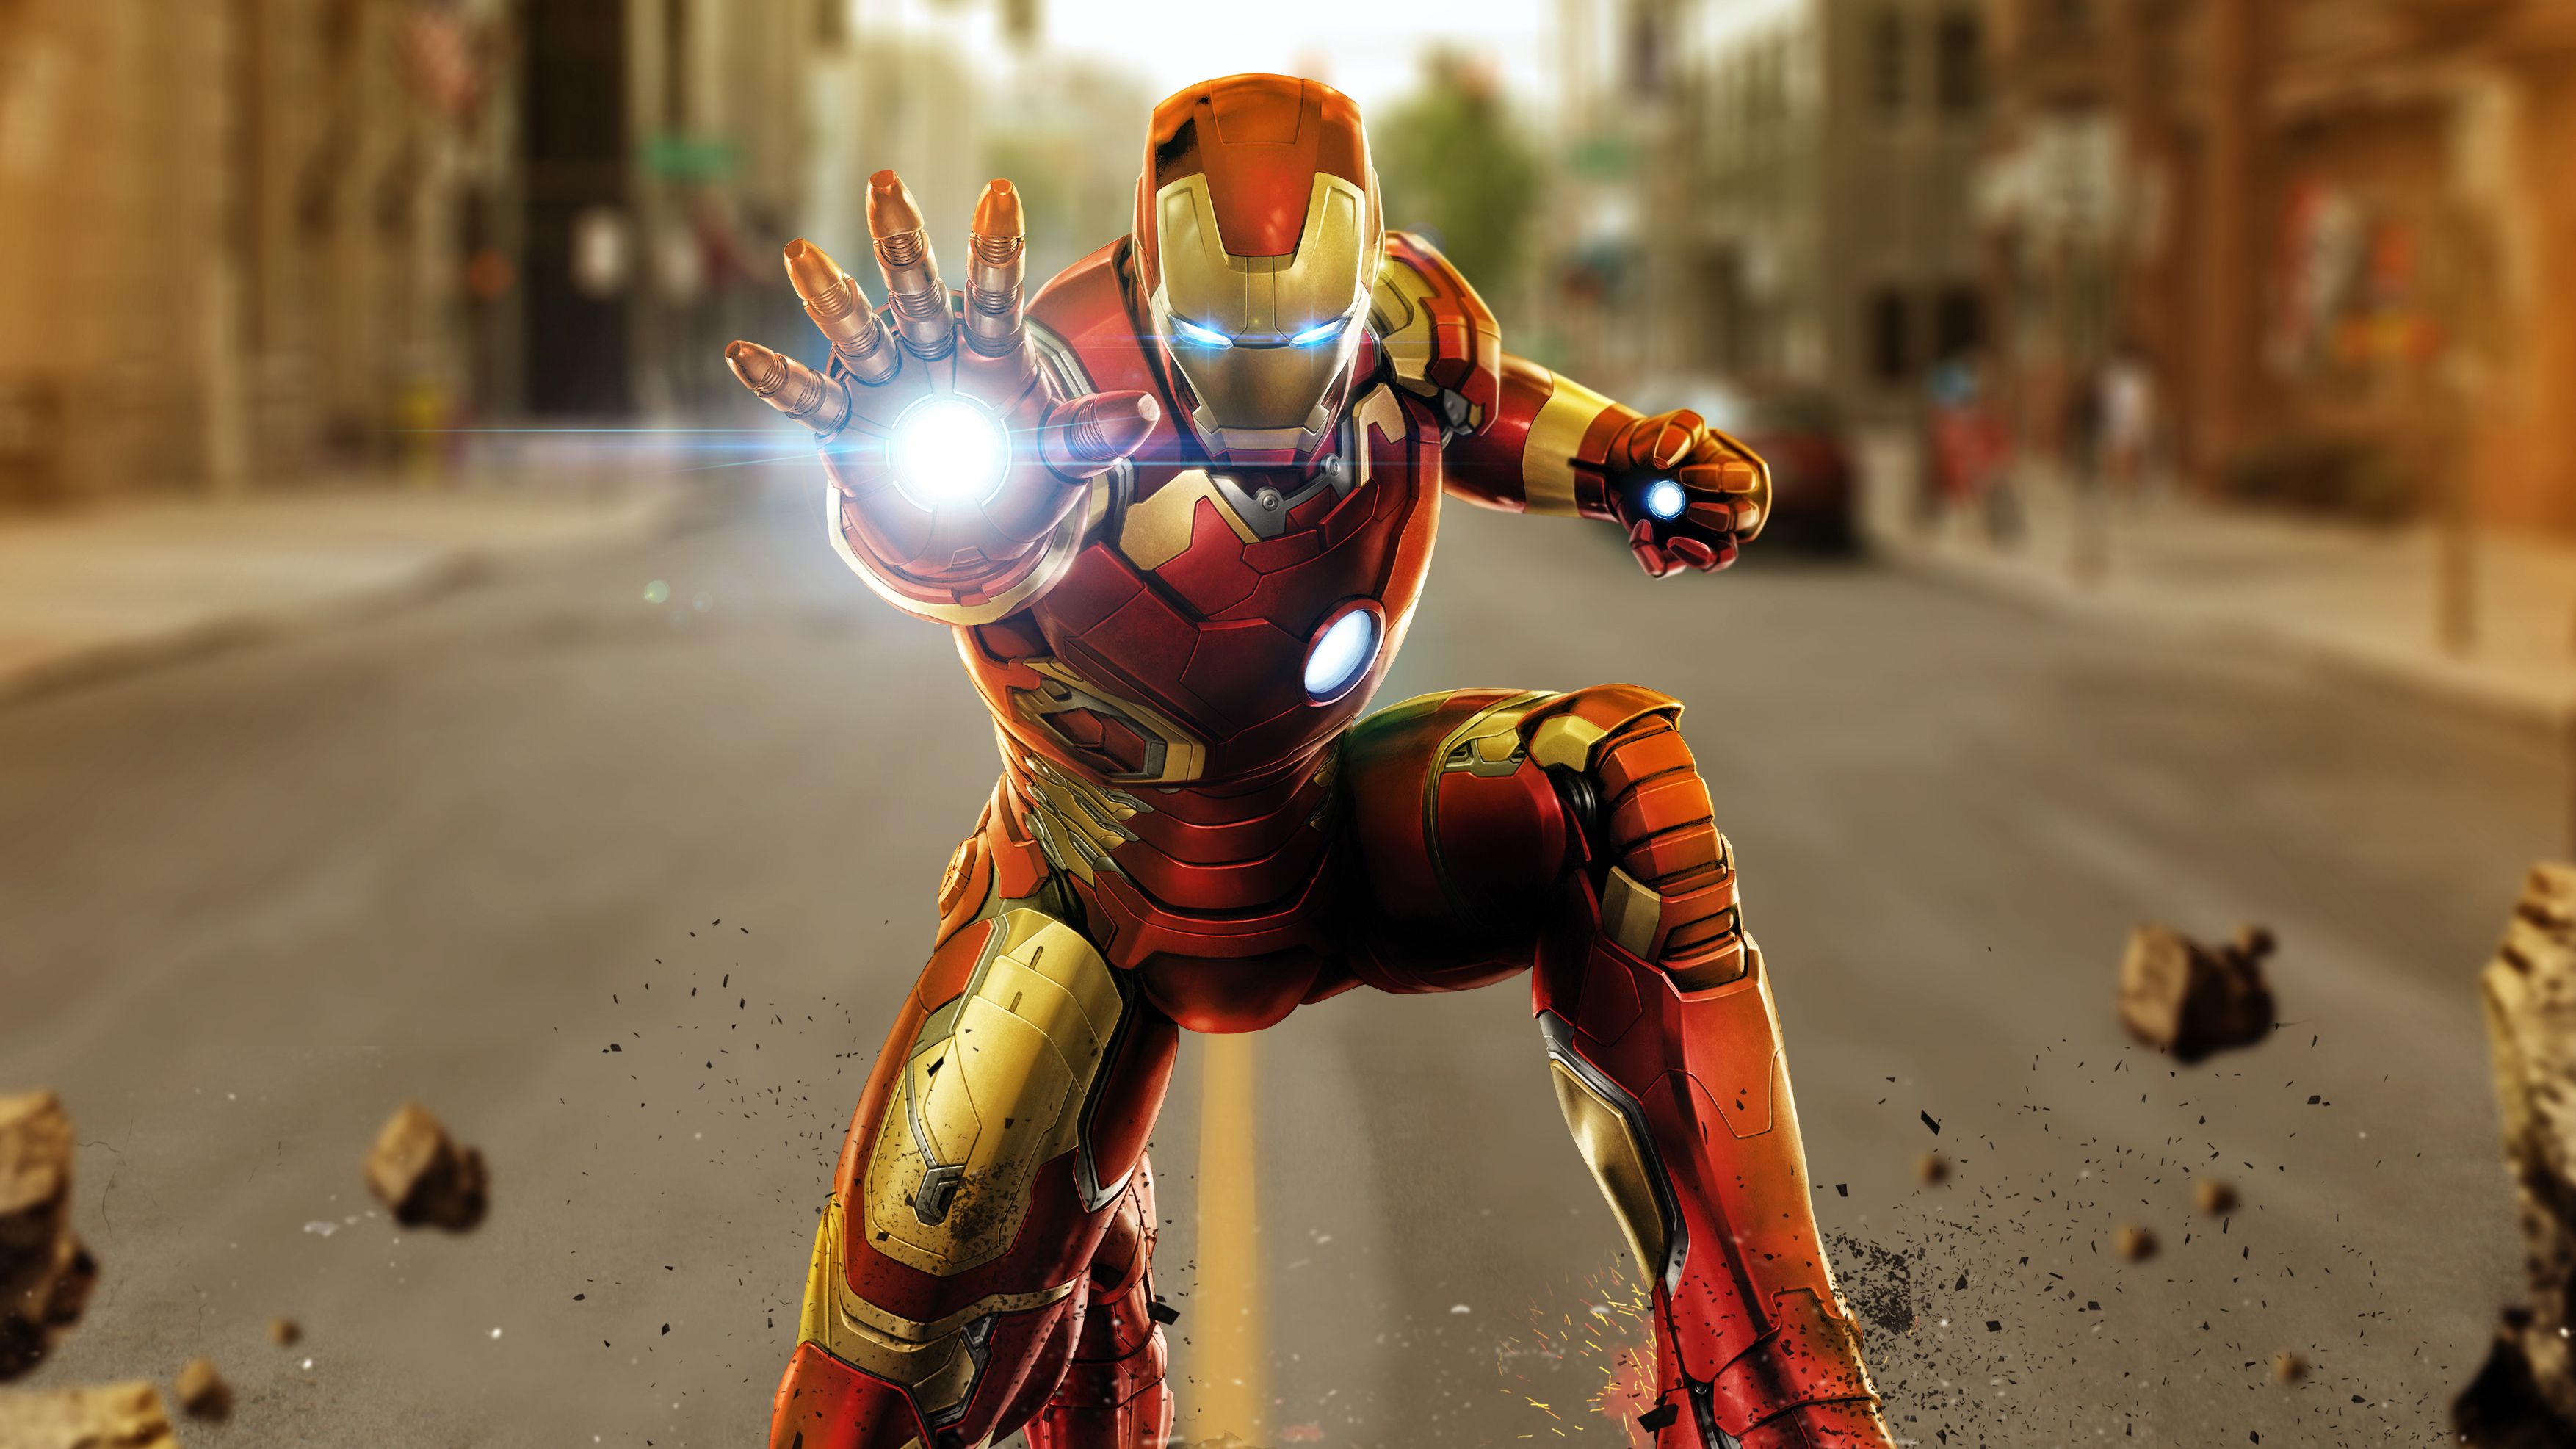 Avengers Age Of Ultron Iron Man Artwork, HD Superheroes, 4k Wallpaper, Image, Background, Photo and Picture